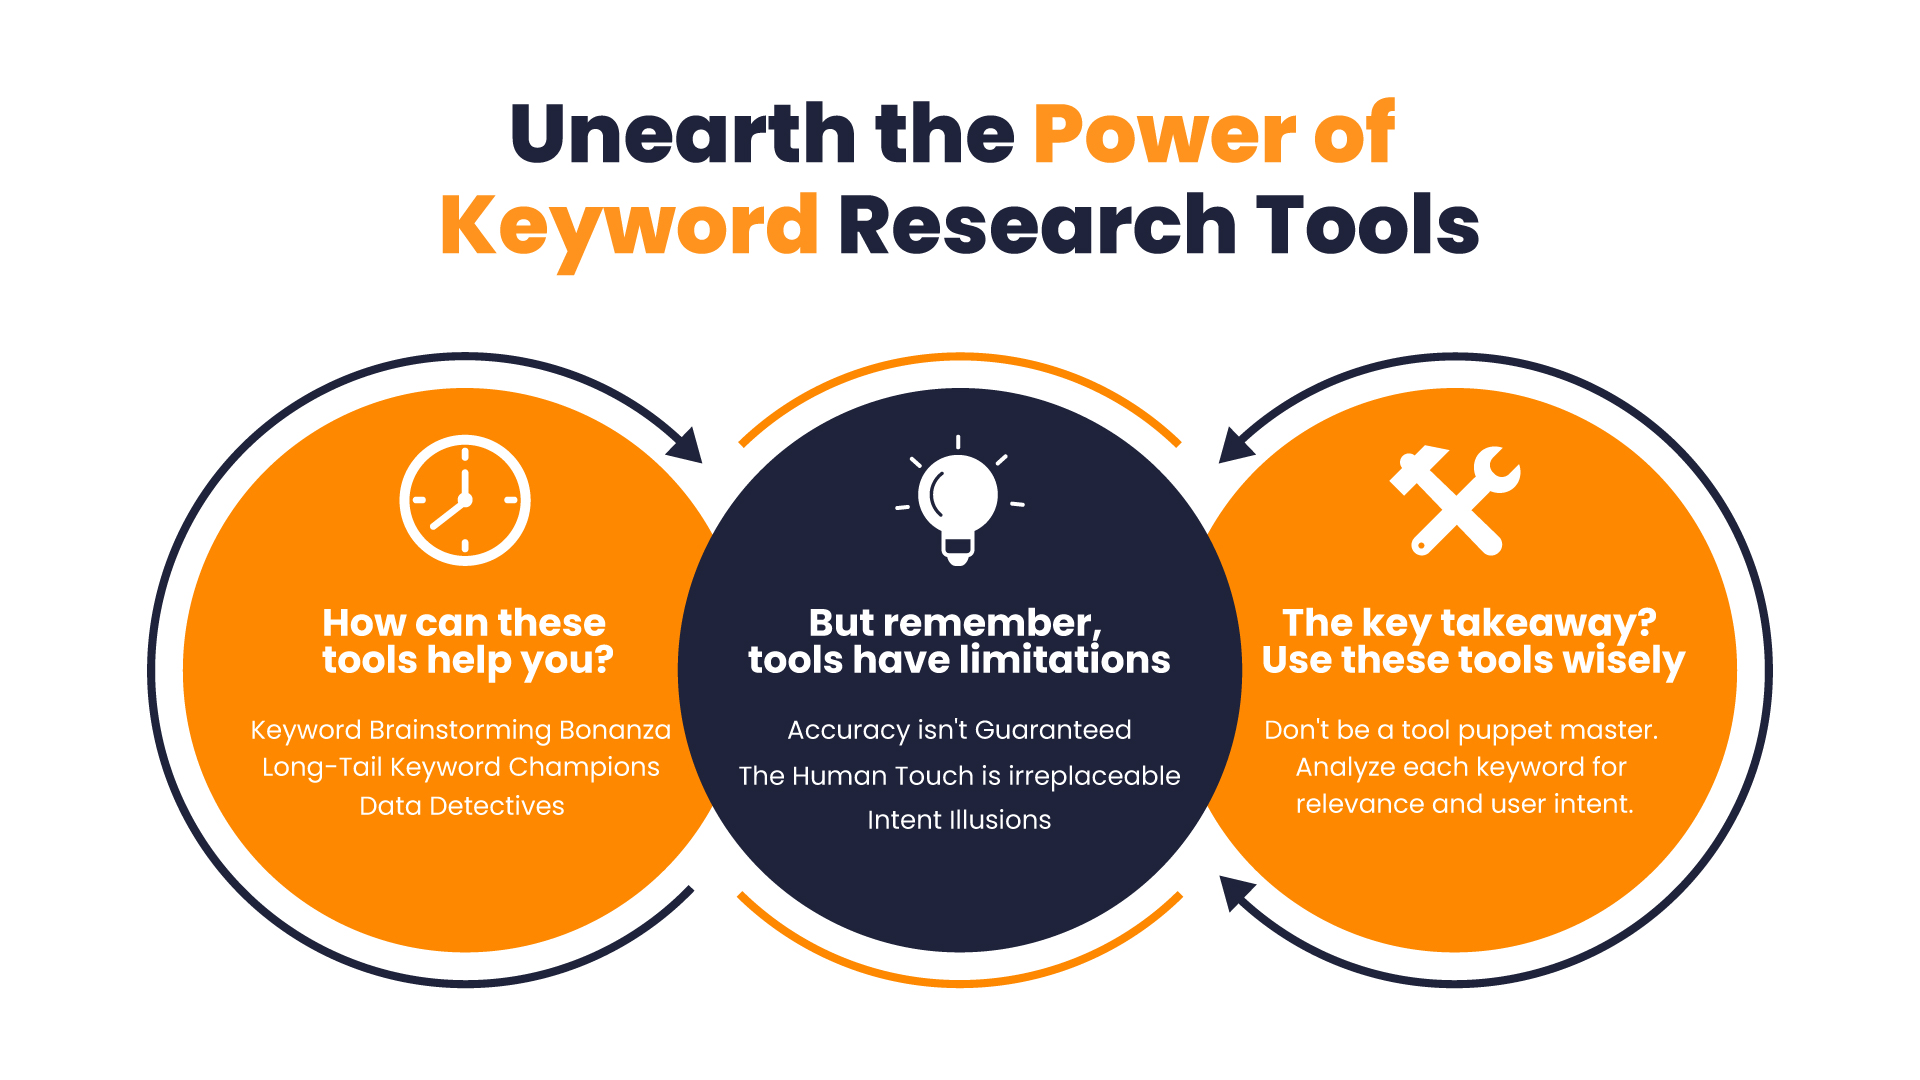 Recognize_The_Power_of_Keyword_Research_Tools